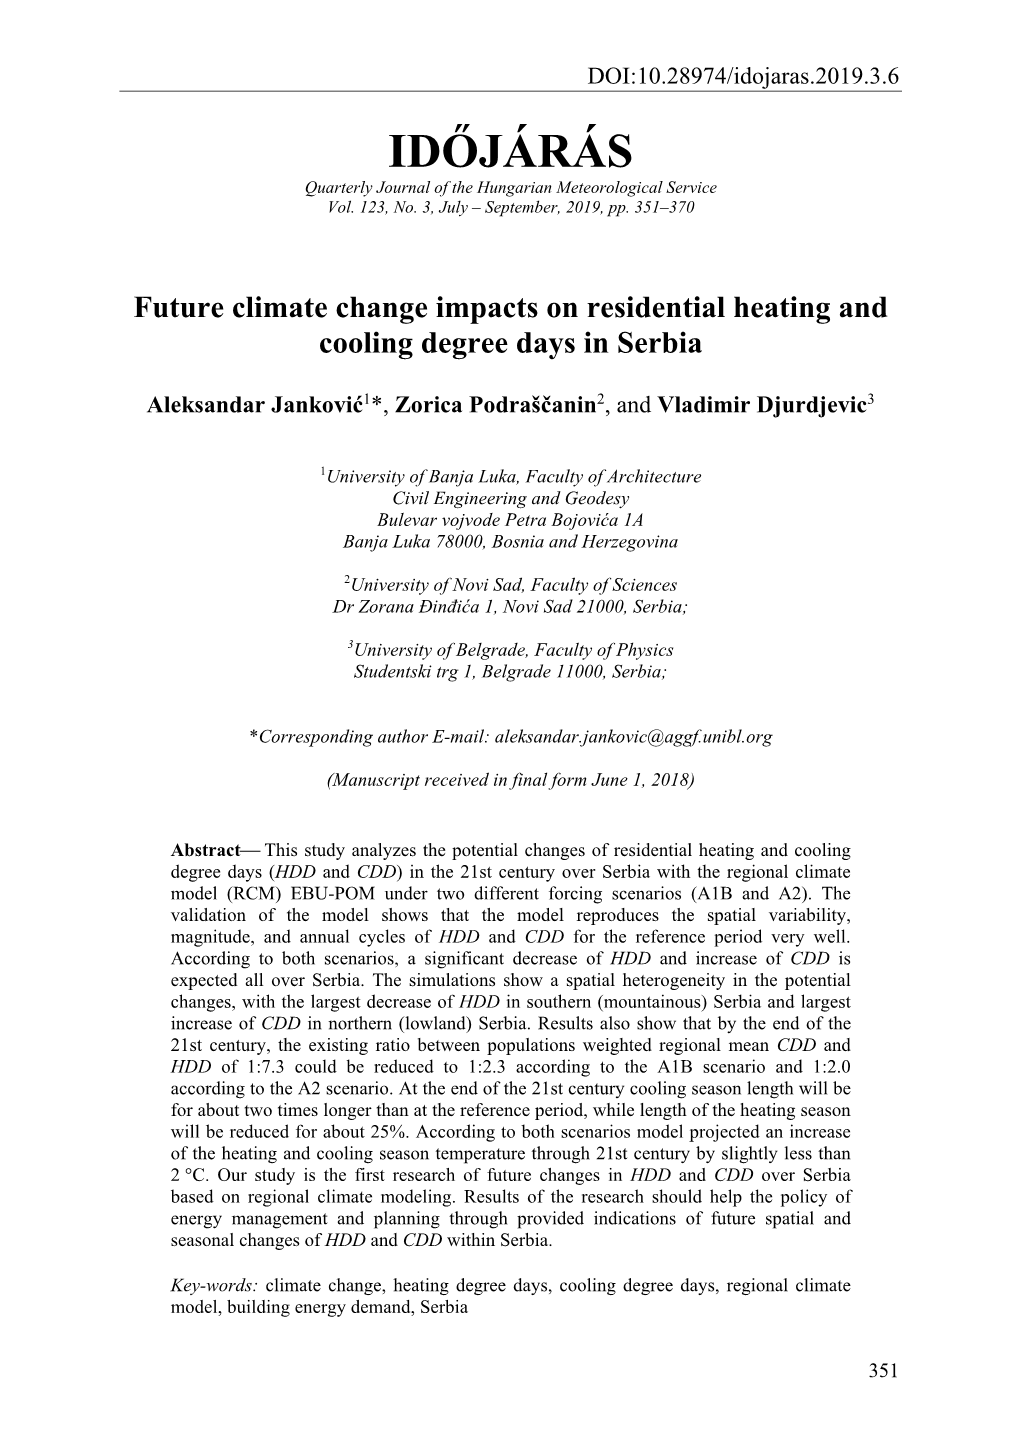 Future Climate Change Impacts on Residential Heating and Cooling Degree Days in Serbia